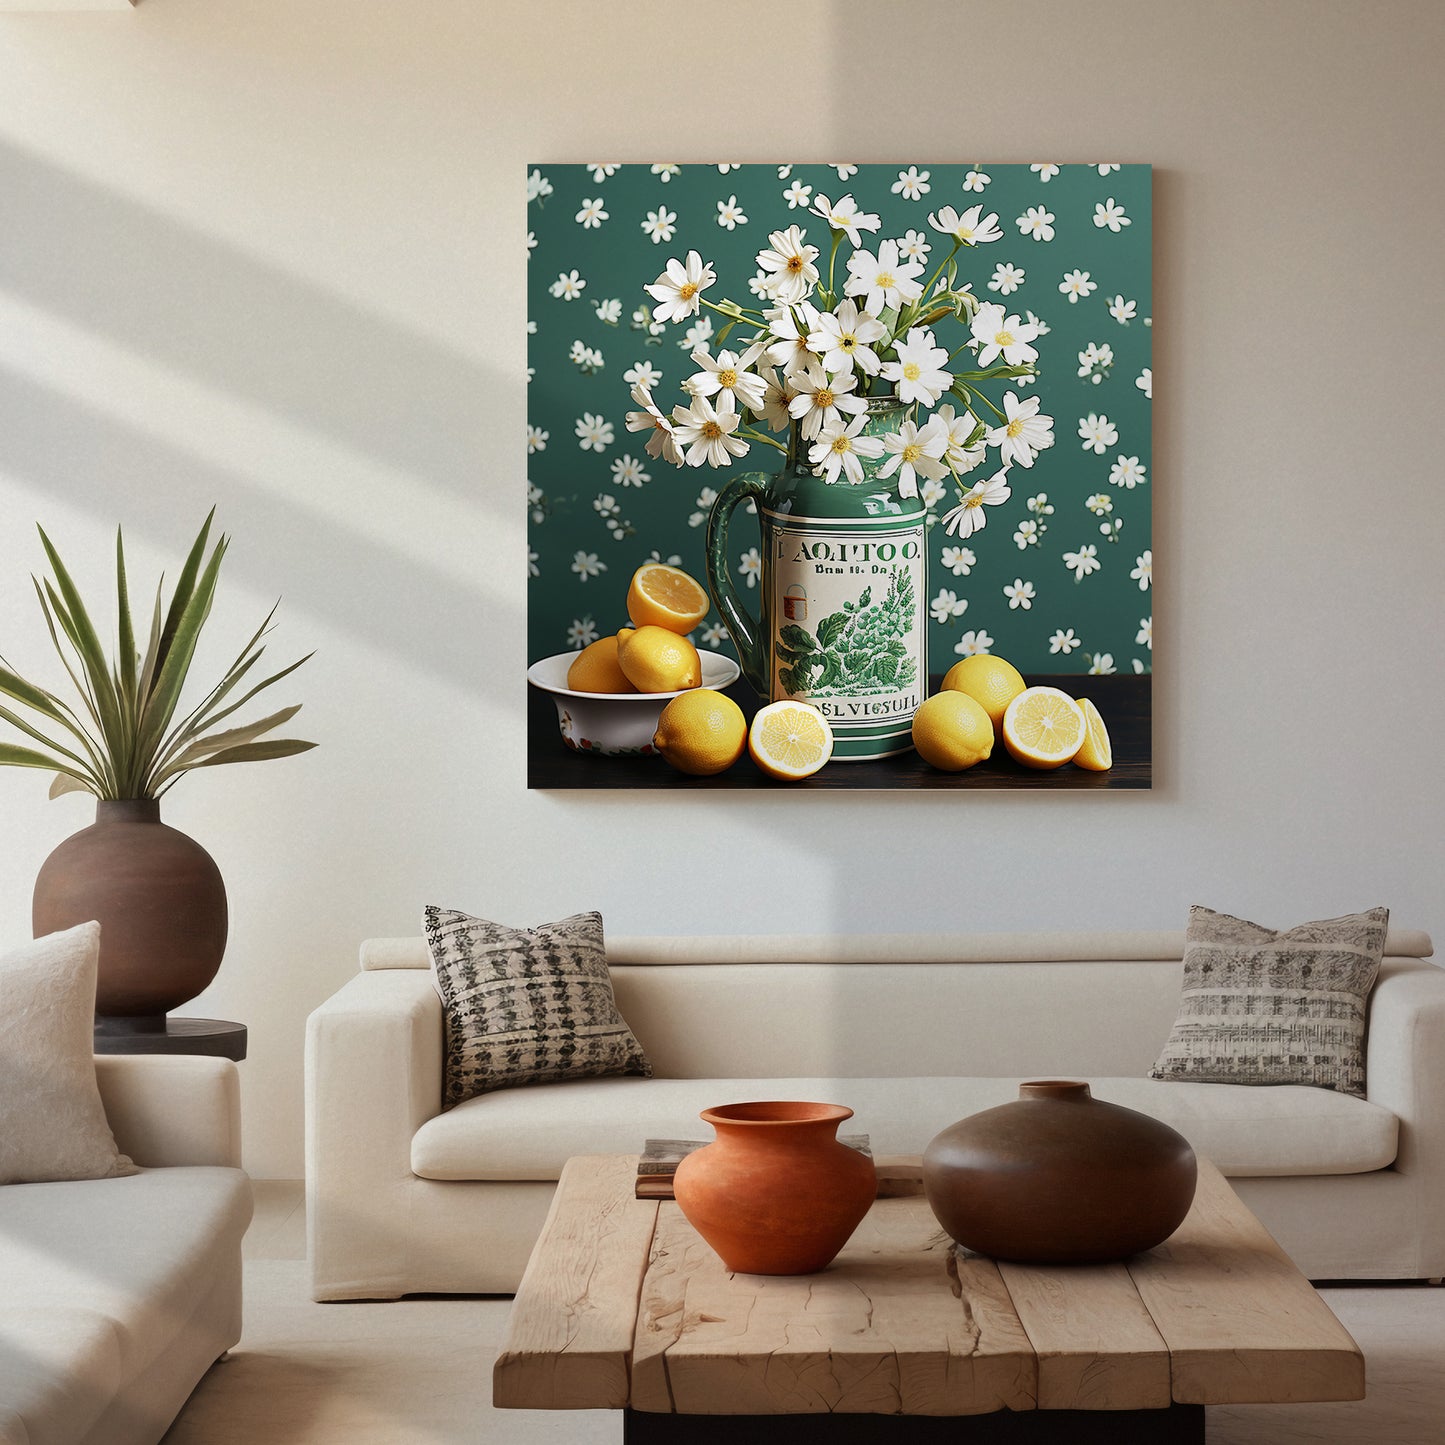 Green and White Floral Art Canvas Painting for Living Room Bedroom Home and Office Wall Decor